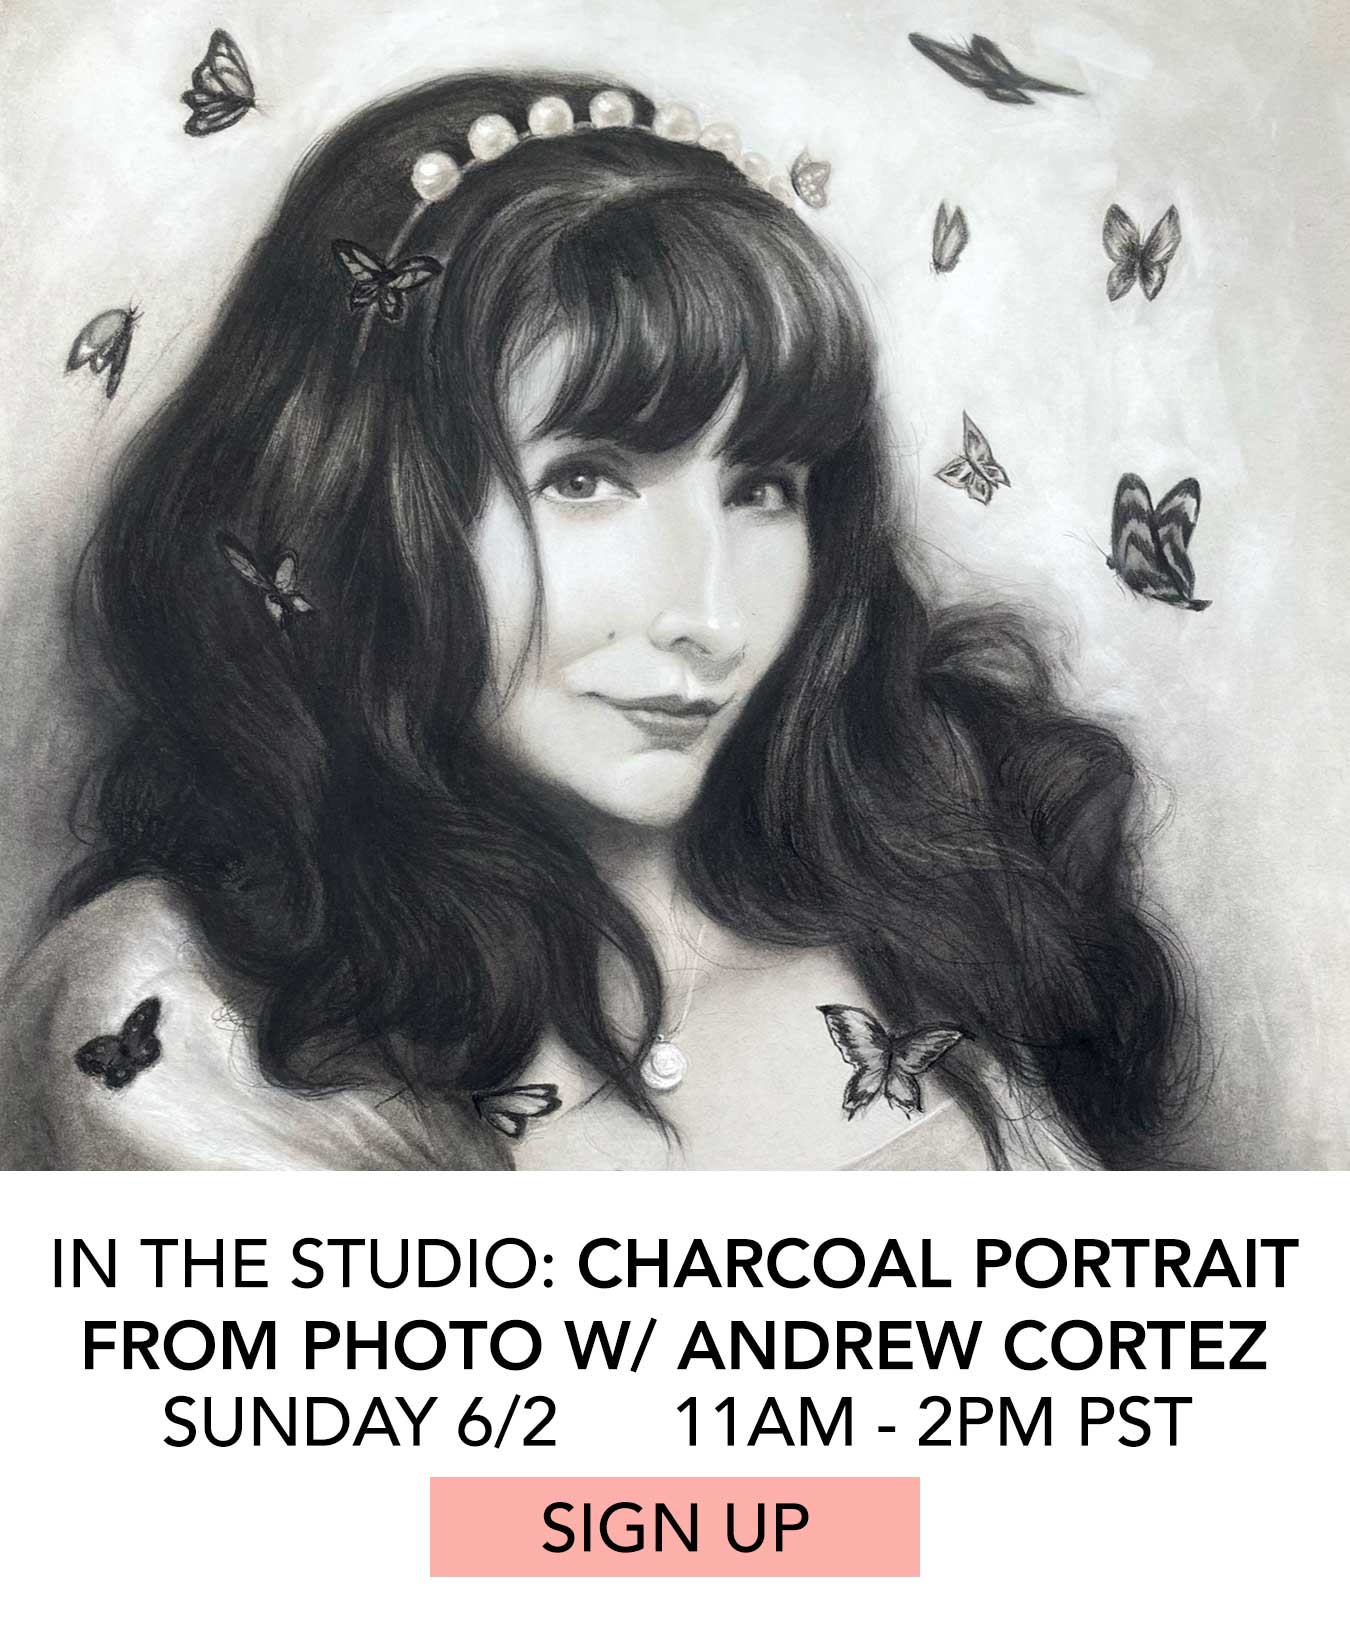 In the Studio: Charcoal Portraits from Photo with Andrew Cortez. Sunday 6/2 from 11:00am to 2:00pm. Click to Sign Up.